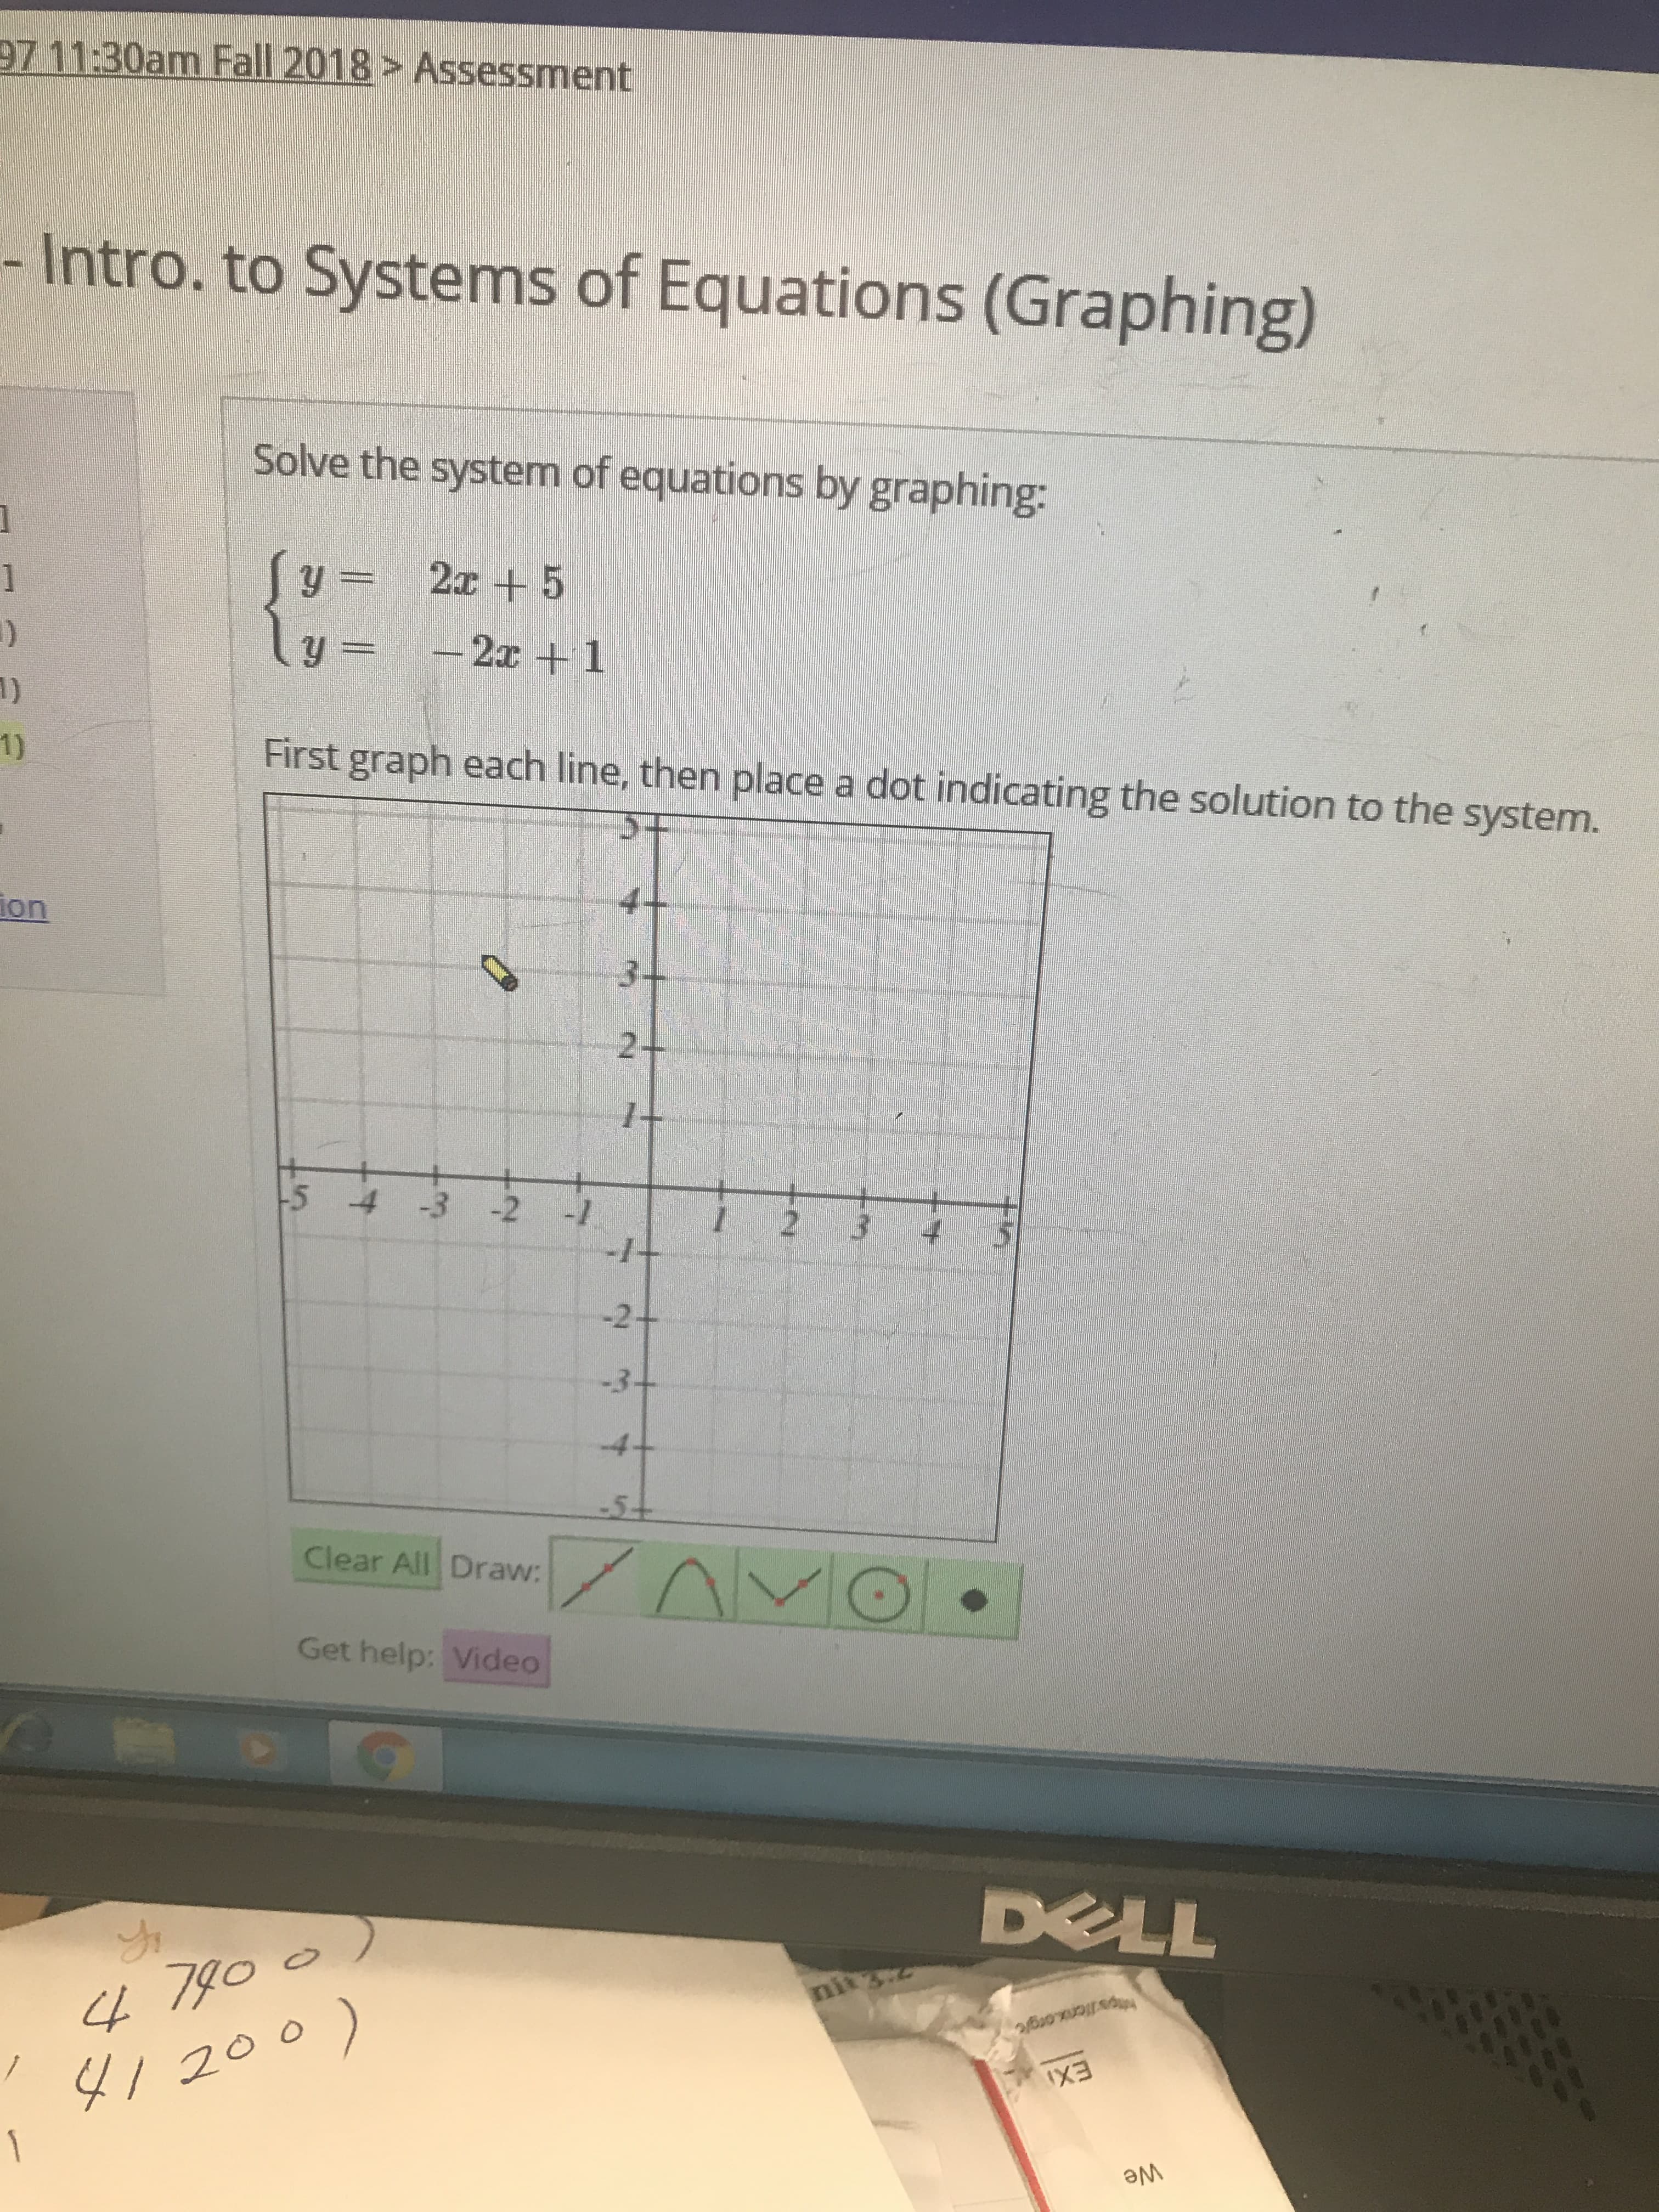 97 11:30am Fall 2018 Assessment
- Intro. to Systems of Equations (Graphing)
Solve the system of equations by graphing:
First graph each line, then place a dot indicating the solution to the system.
ion
5 4 3 2
Clear All Draw
Get help: Video
7g0
LA
ONN
